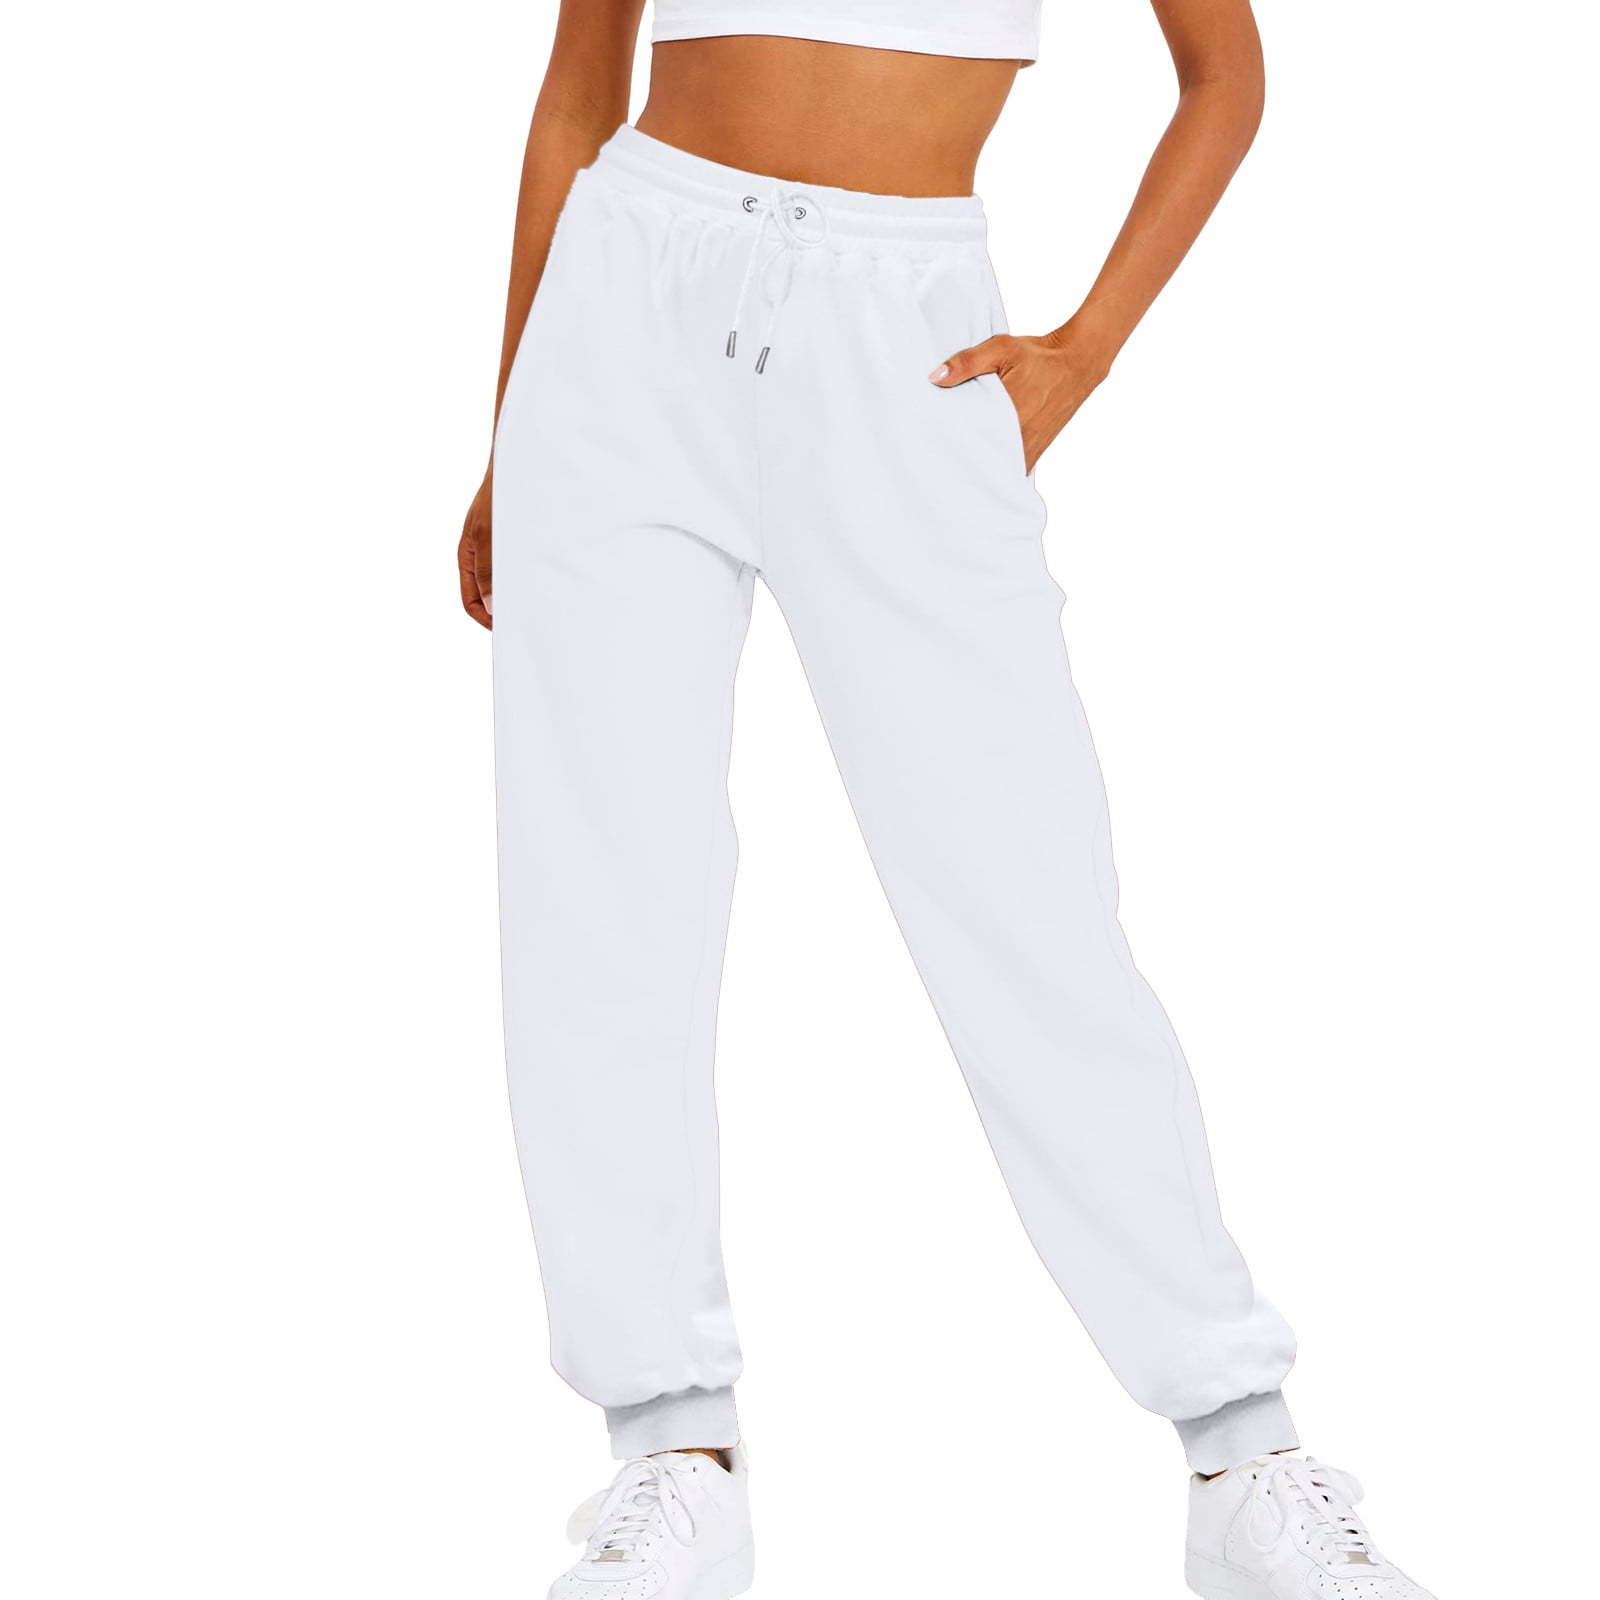 High Waisted Loose Sweat Pants Women's Gaucho Jogging Casual Work